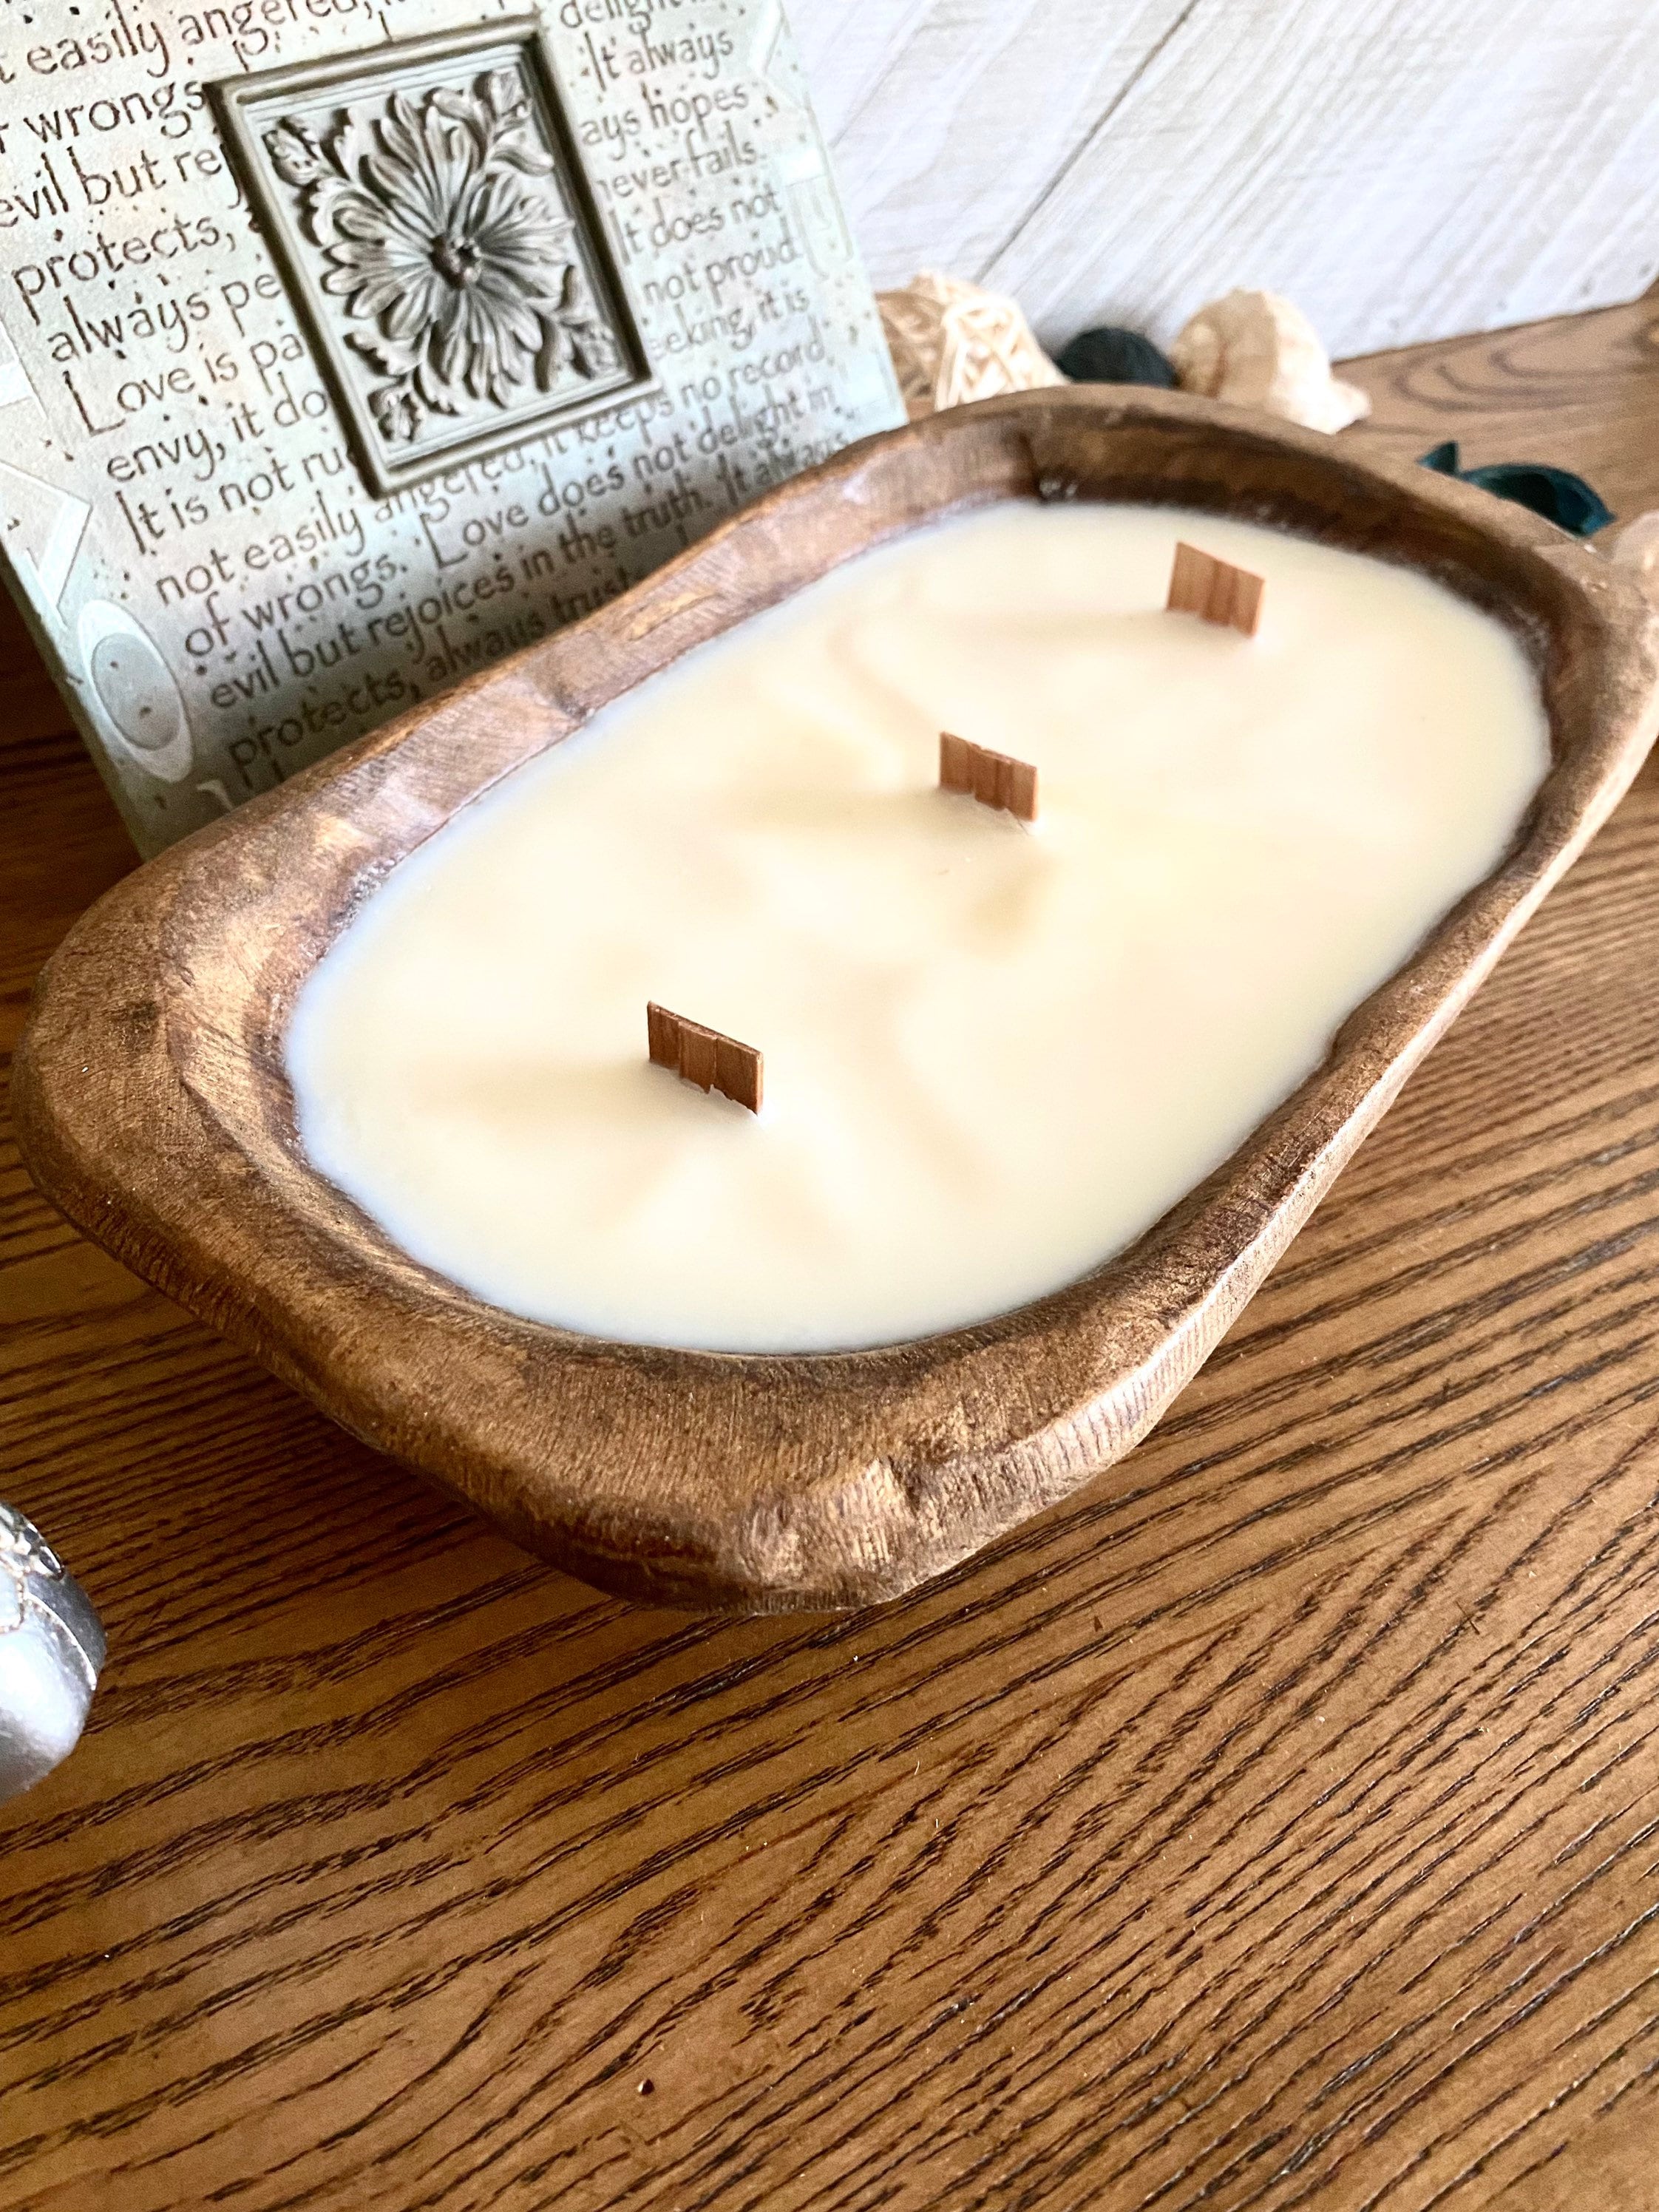 Two Wicks Soy Wax Candle in a Porcelain Bowl - Deruta Style